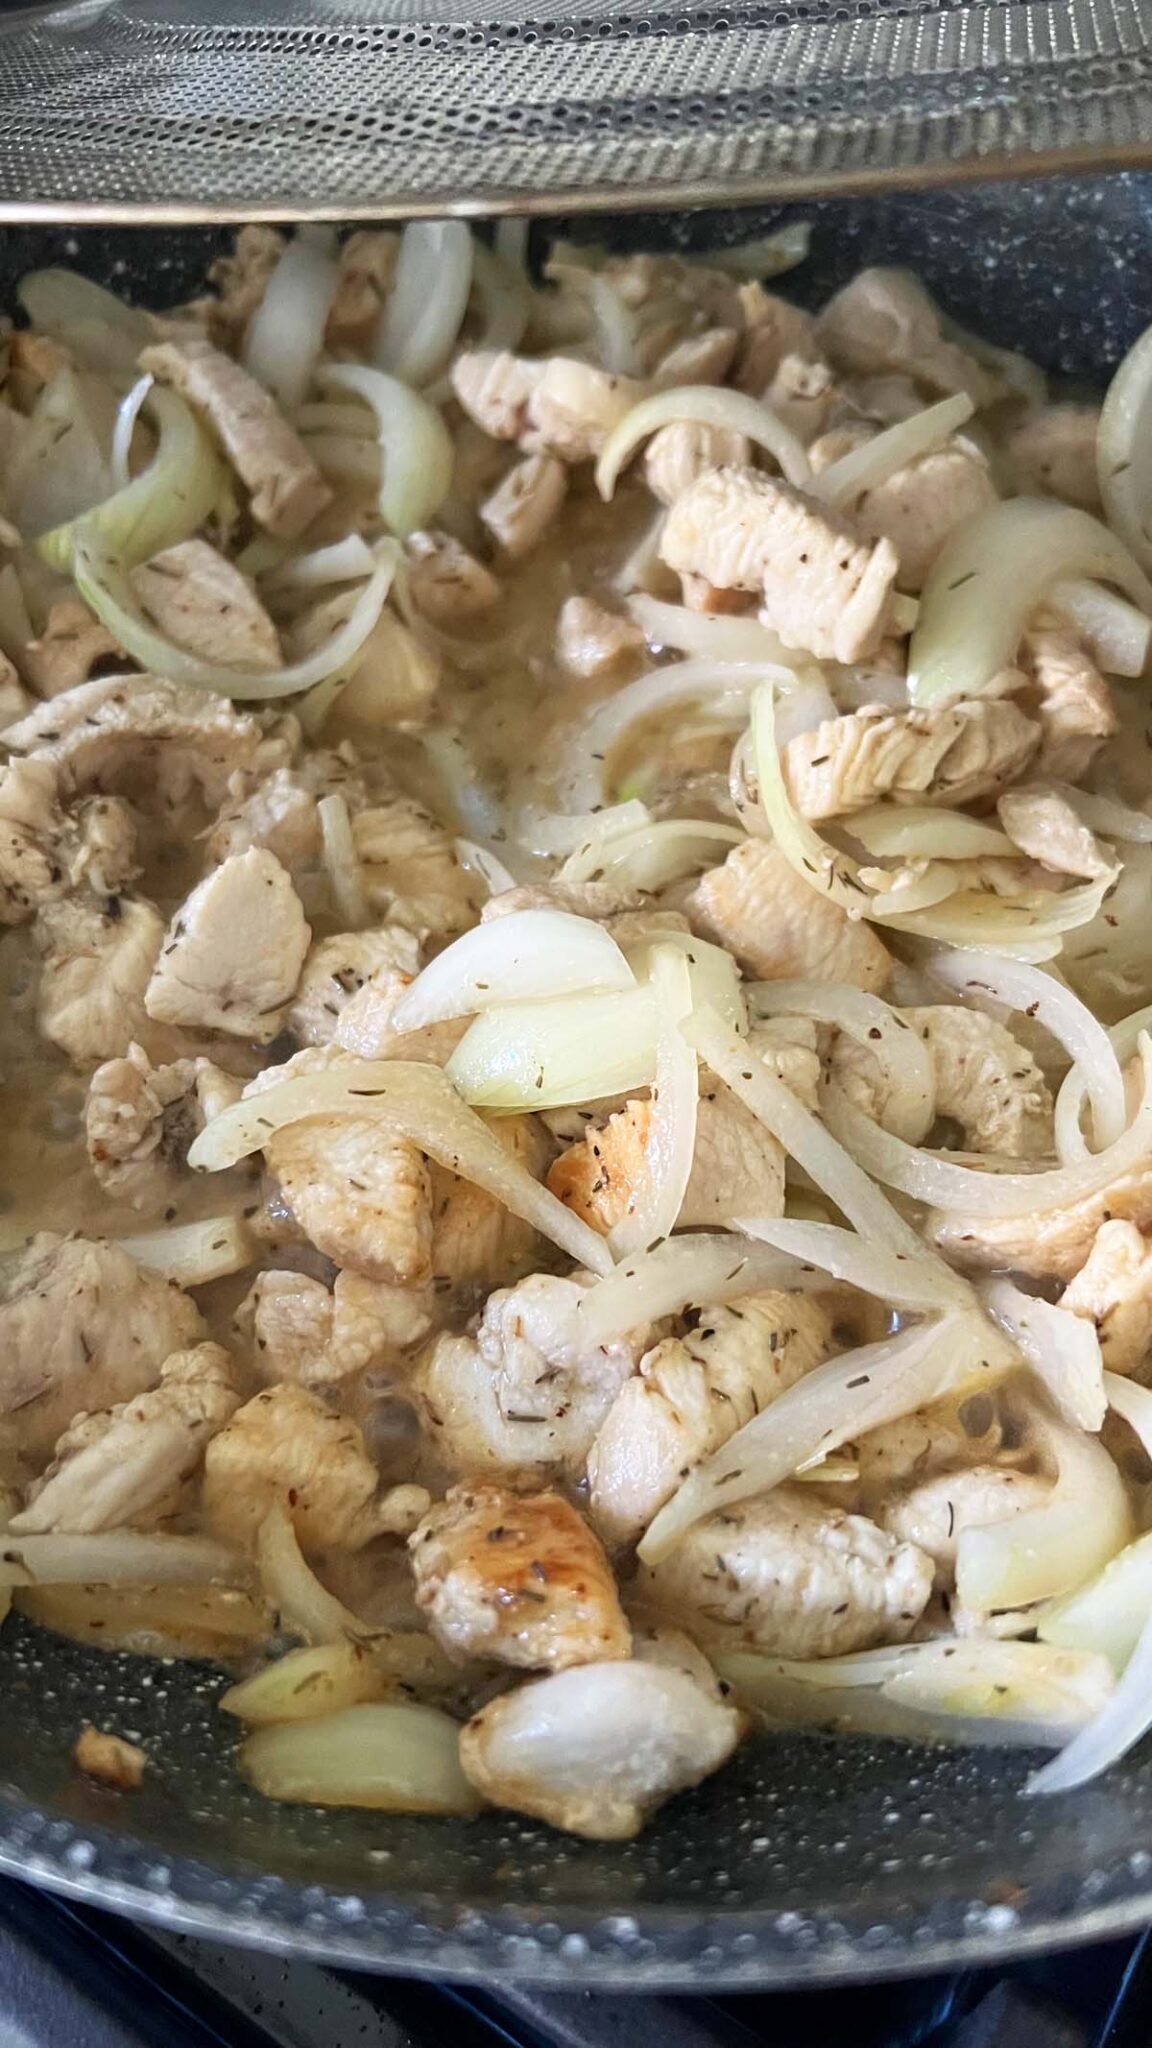 Chicken and onions in a grey skillet.